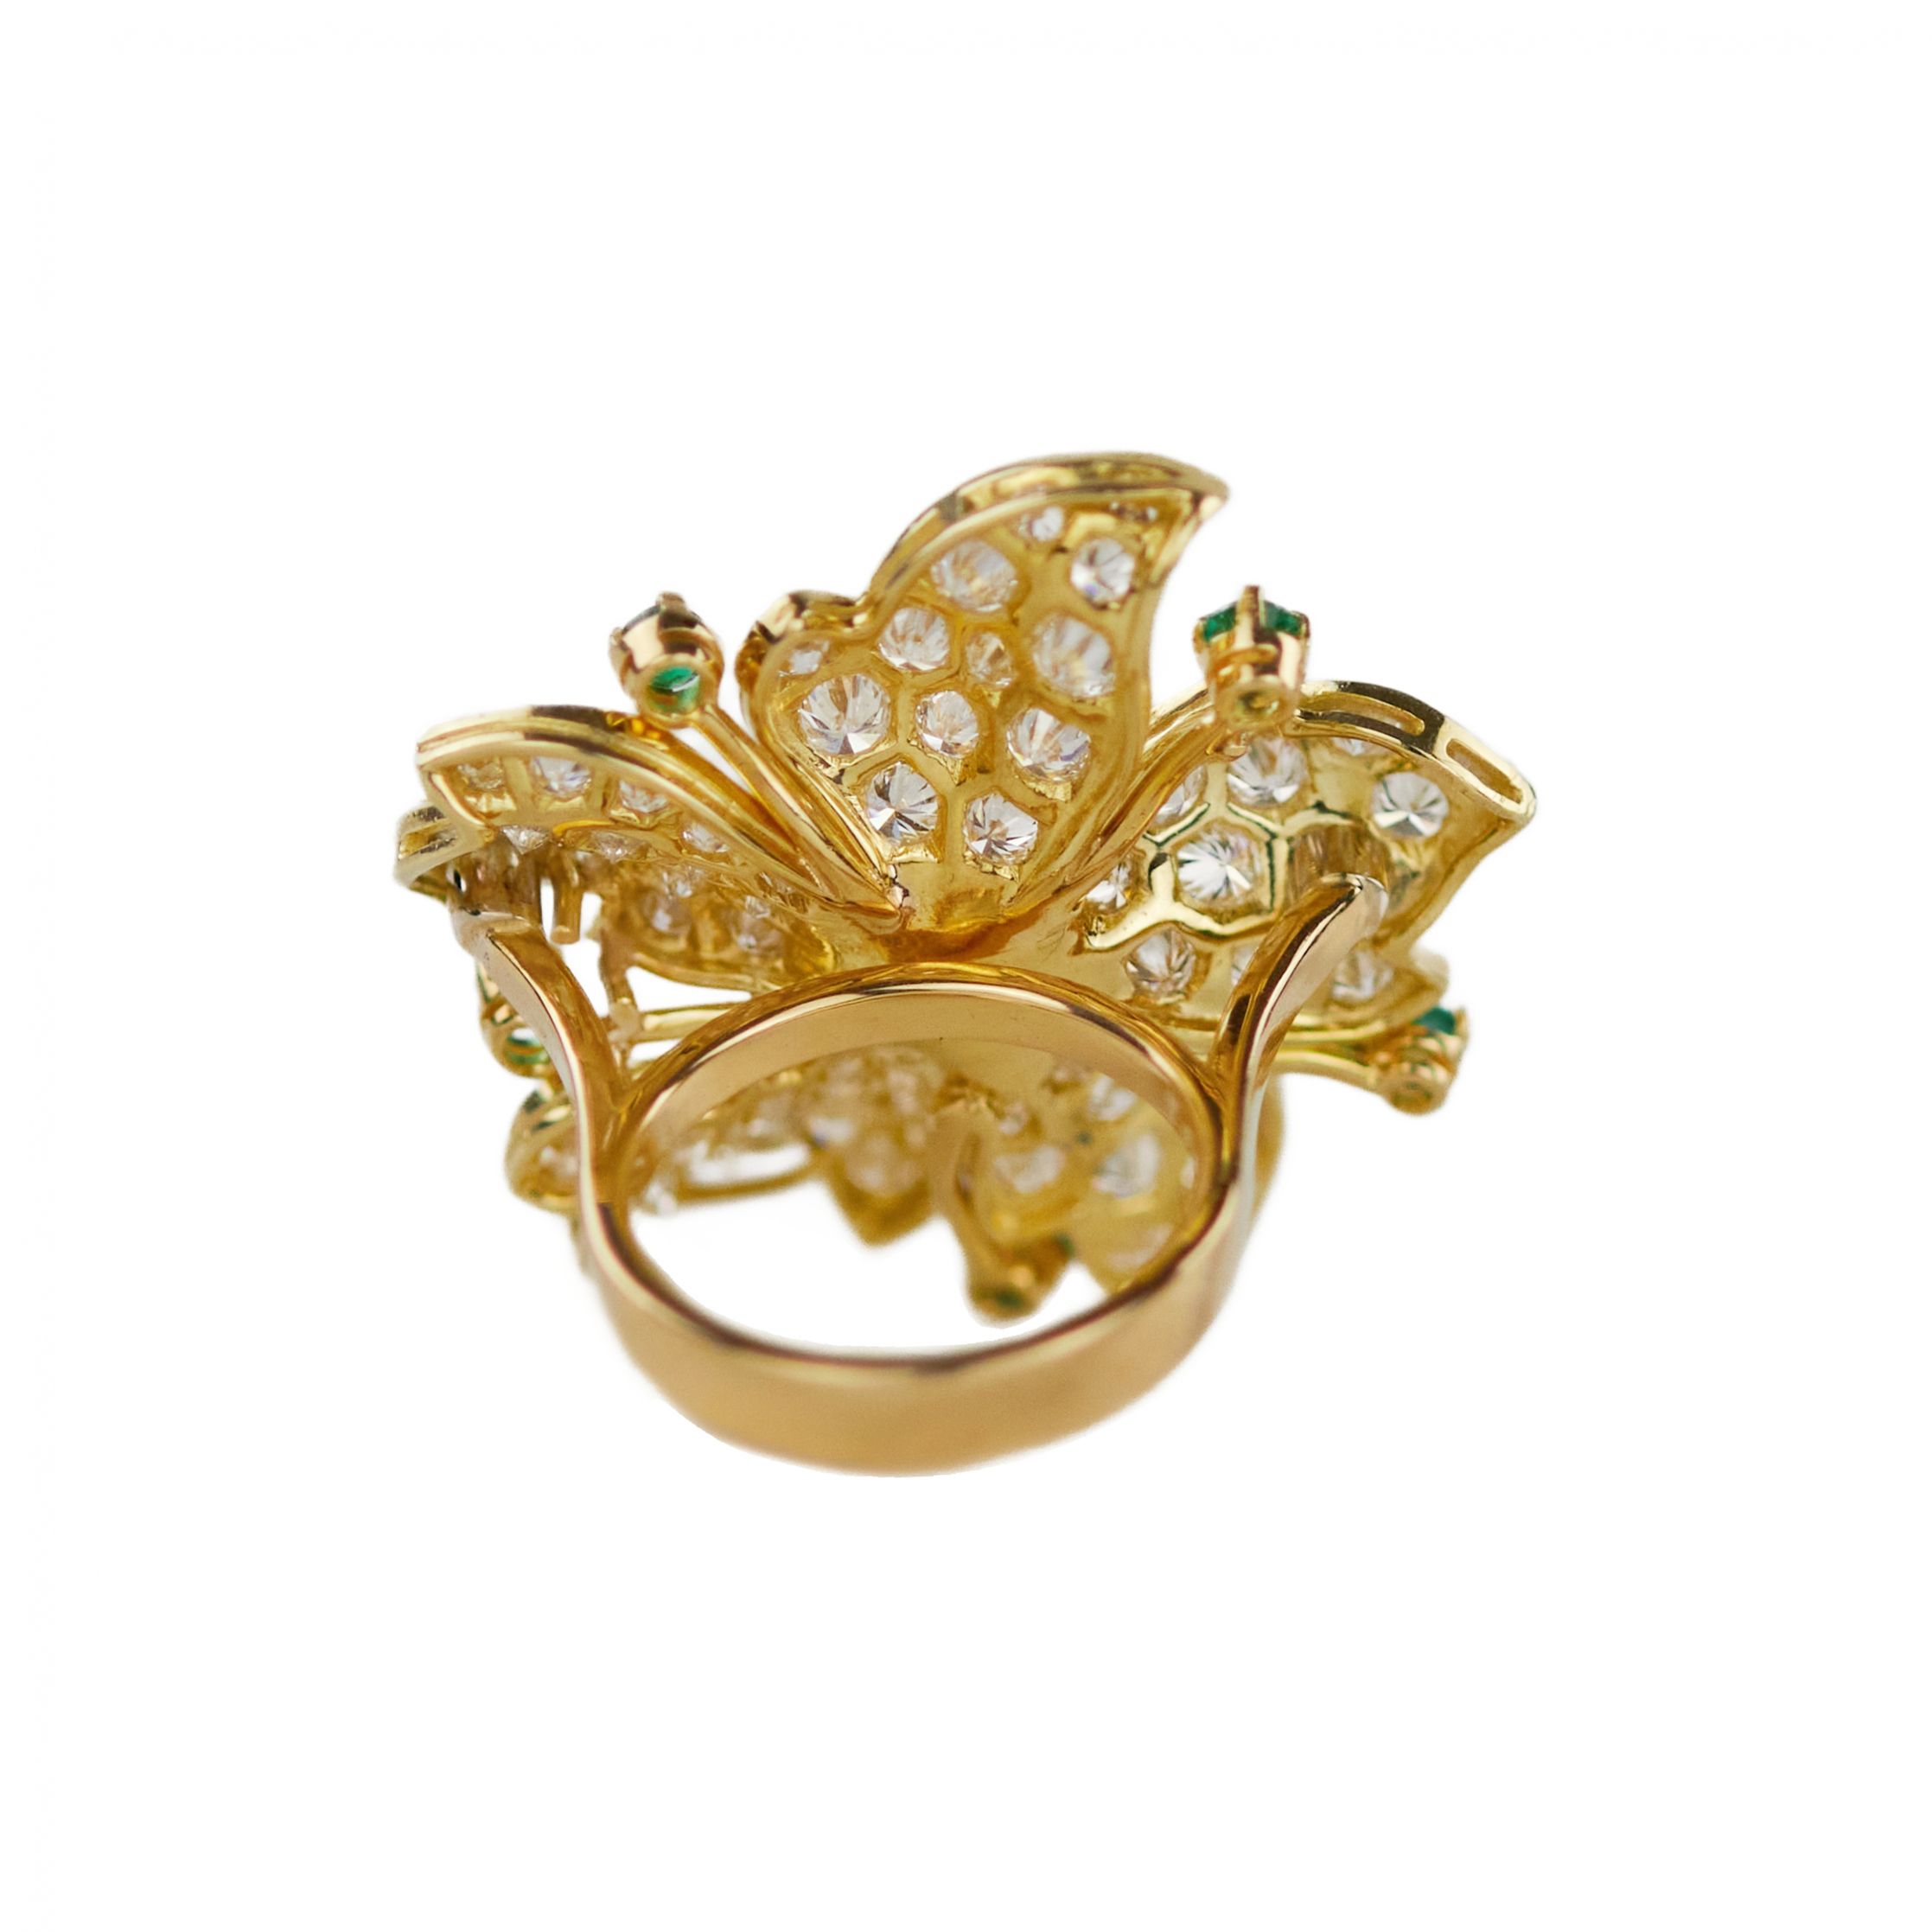 Gold 18K ring with seventy-seven diamonds and five emeralds. - Image 6 of 8